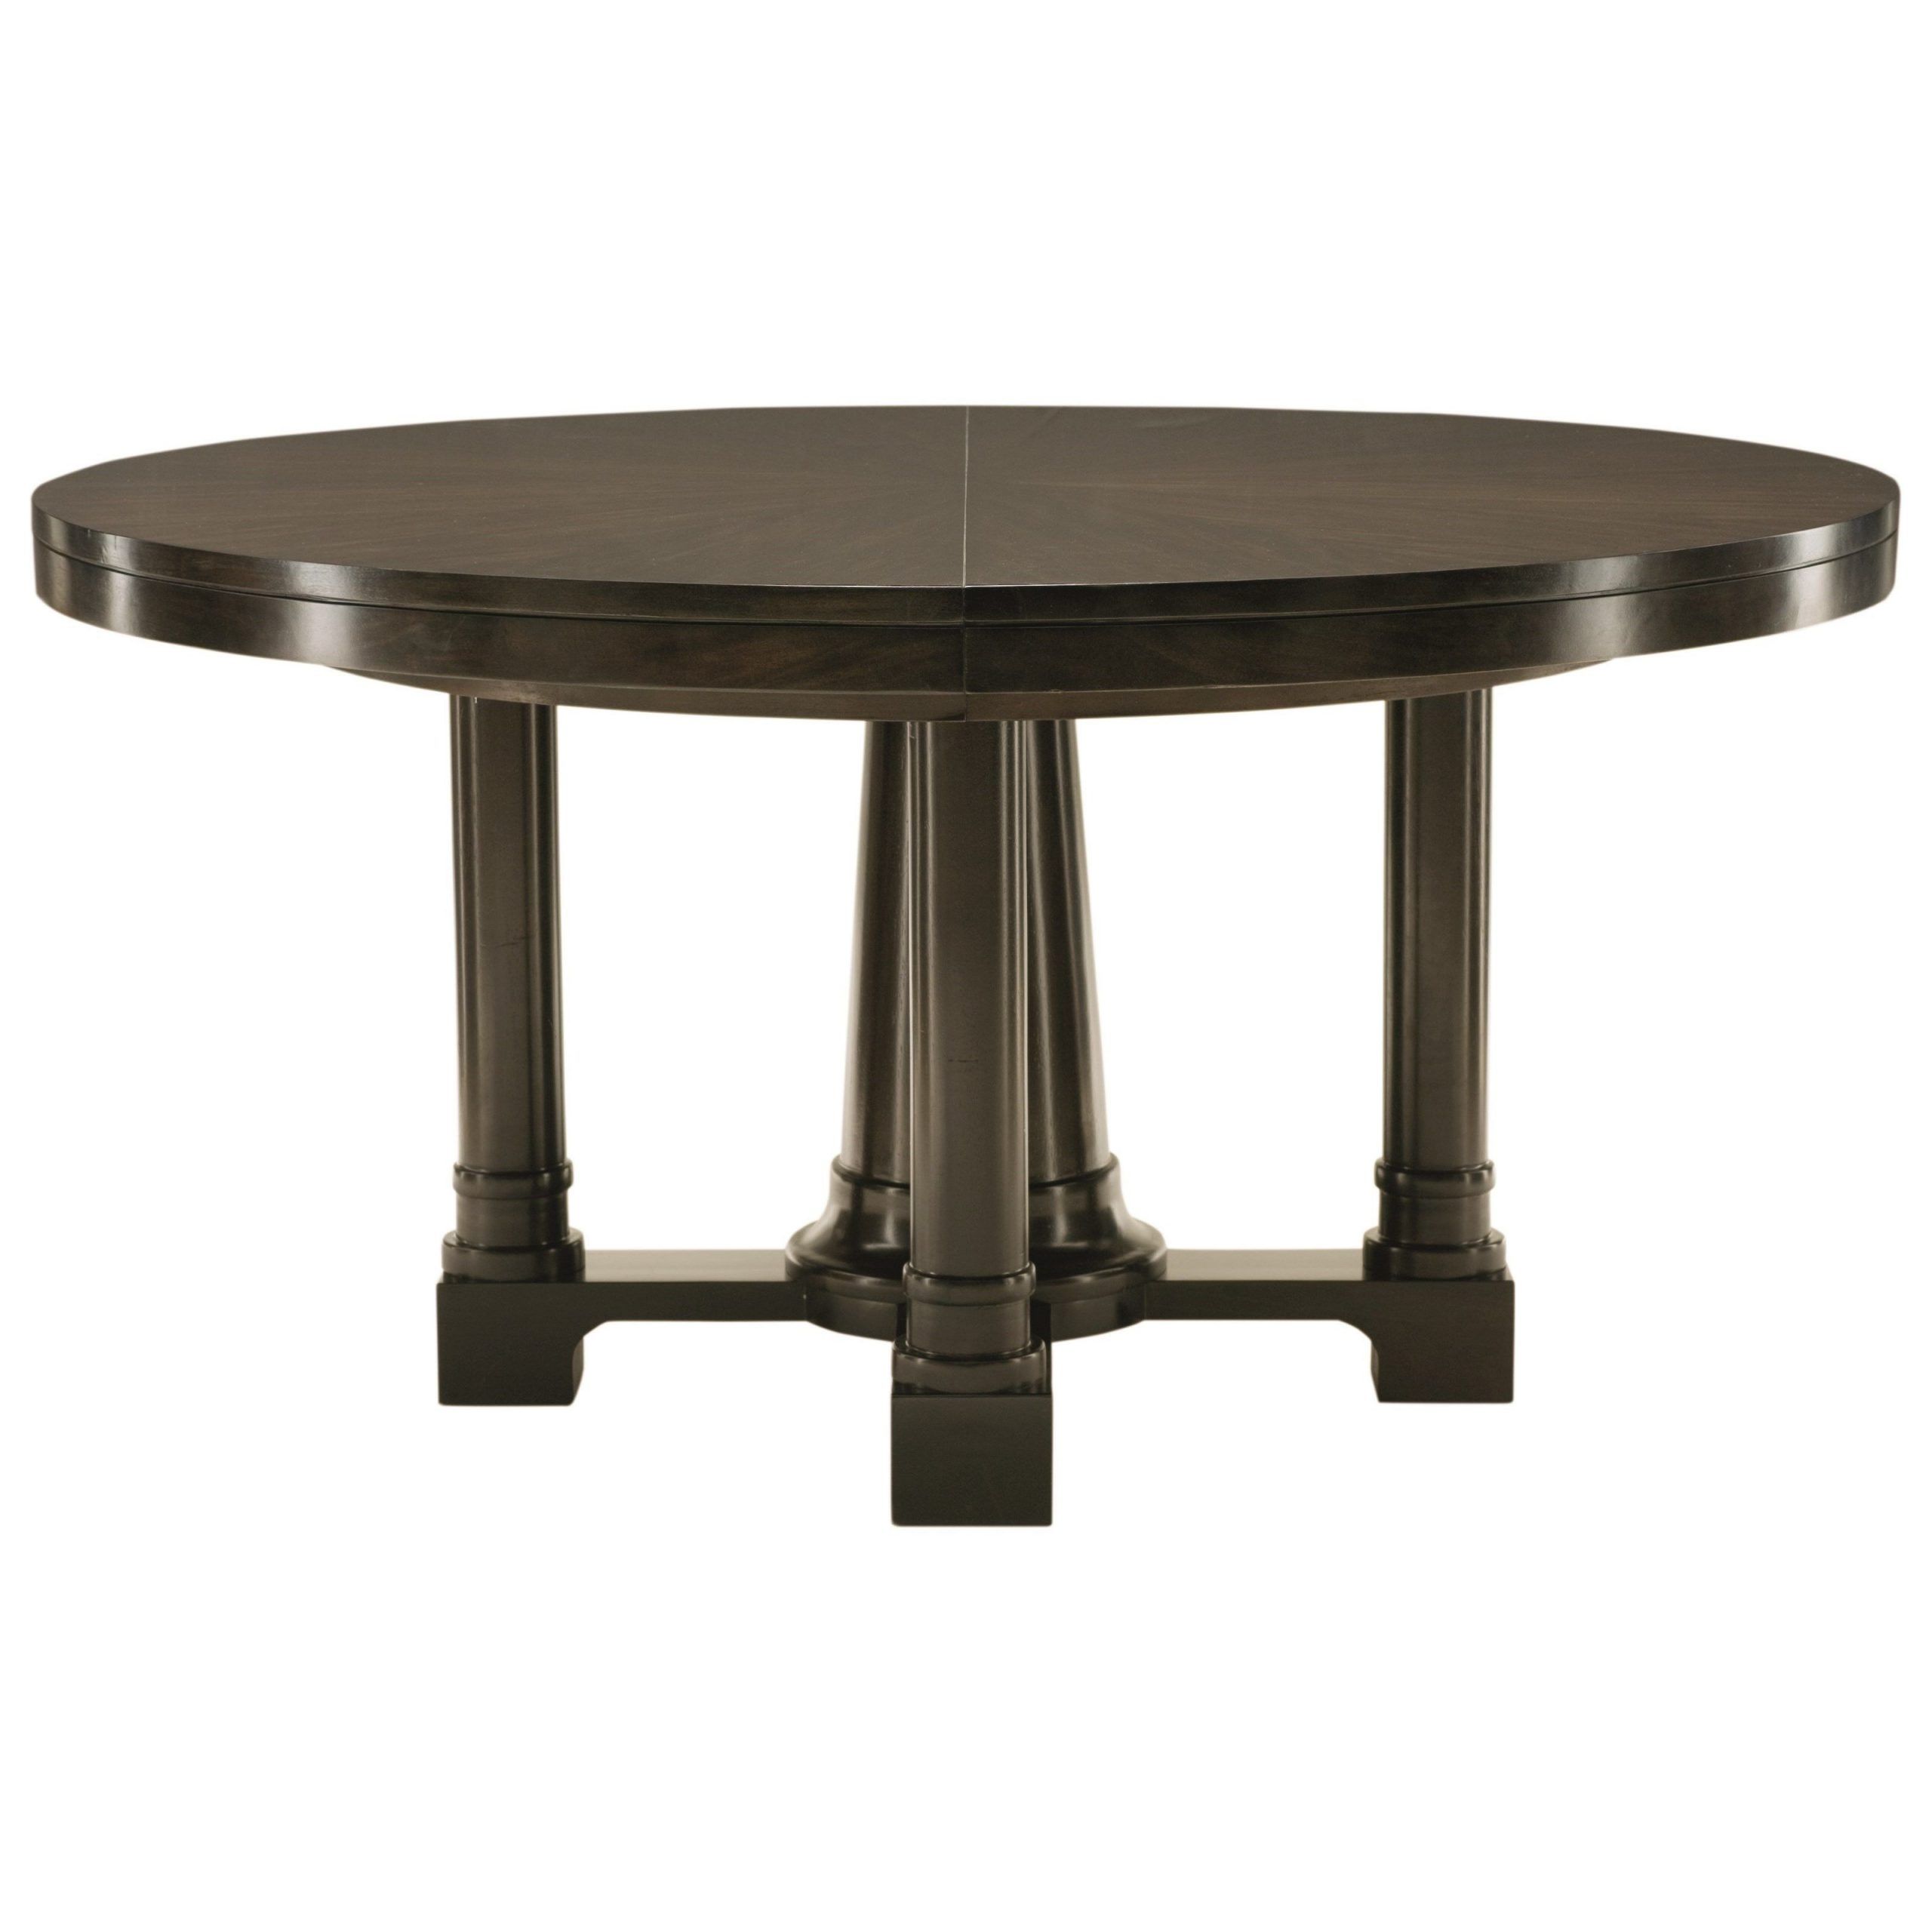 Canalou 46'' Pedestal Dining Tables With Latest Sutton House Round Pedestal Dining Tablebernhardt At (View 18 of 20)